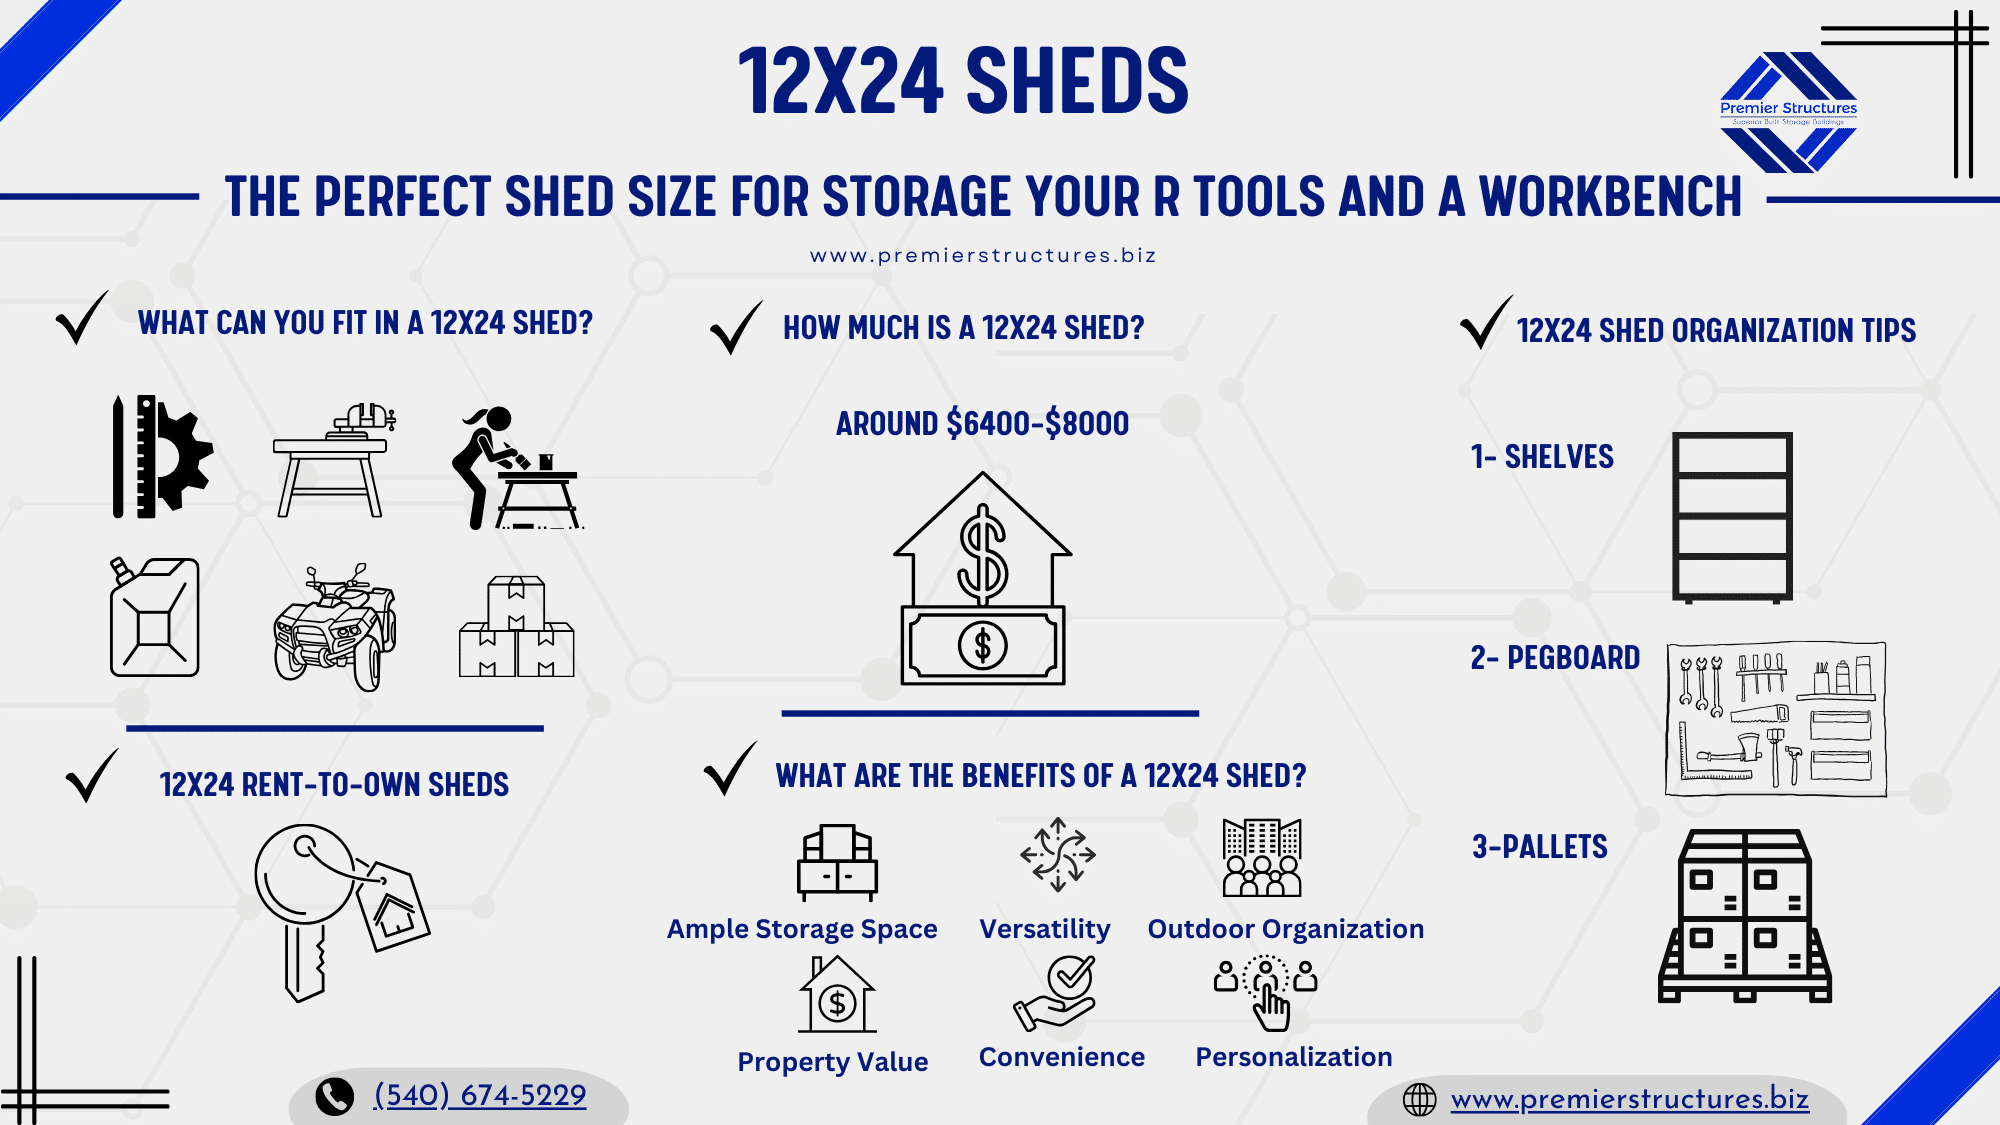 12x24 shed infographic